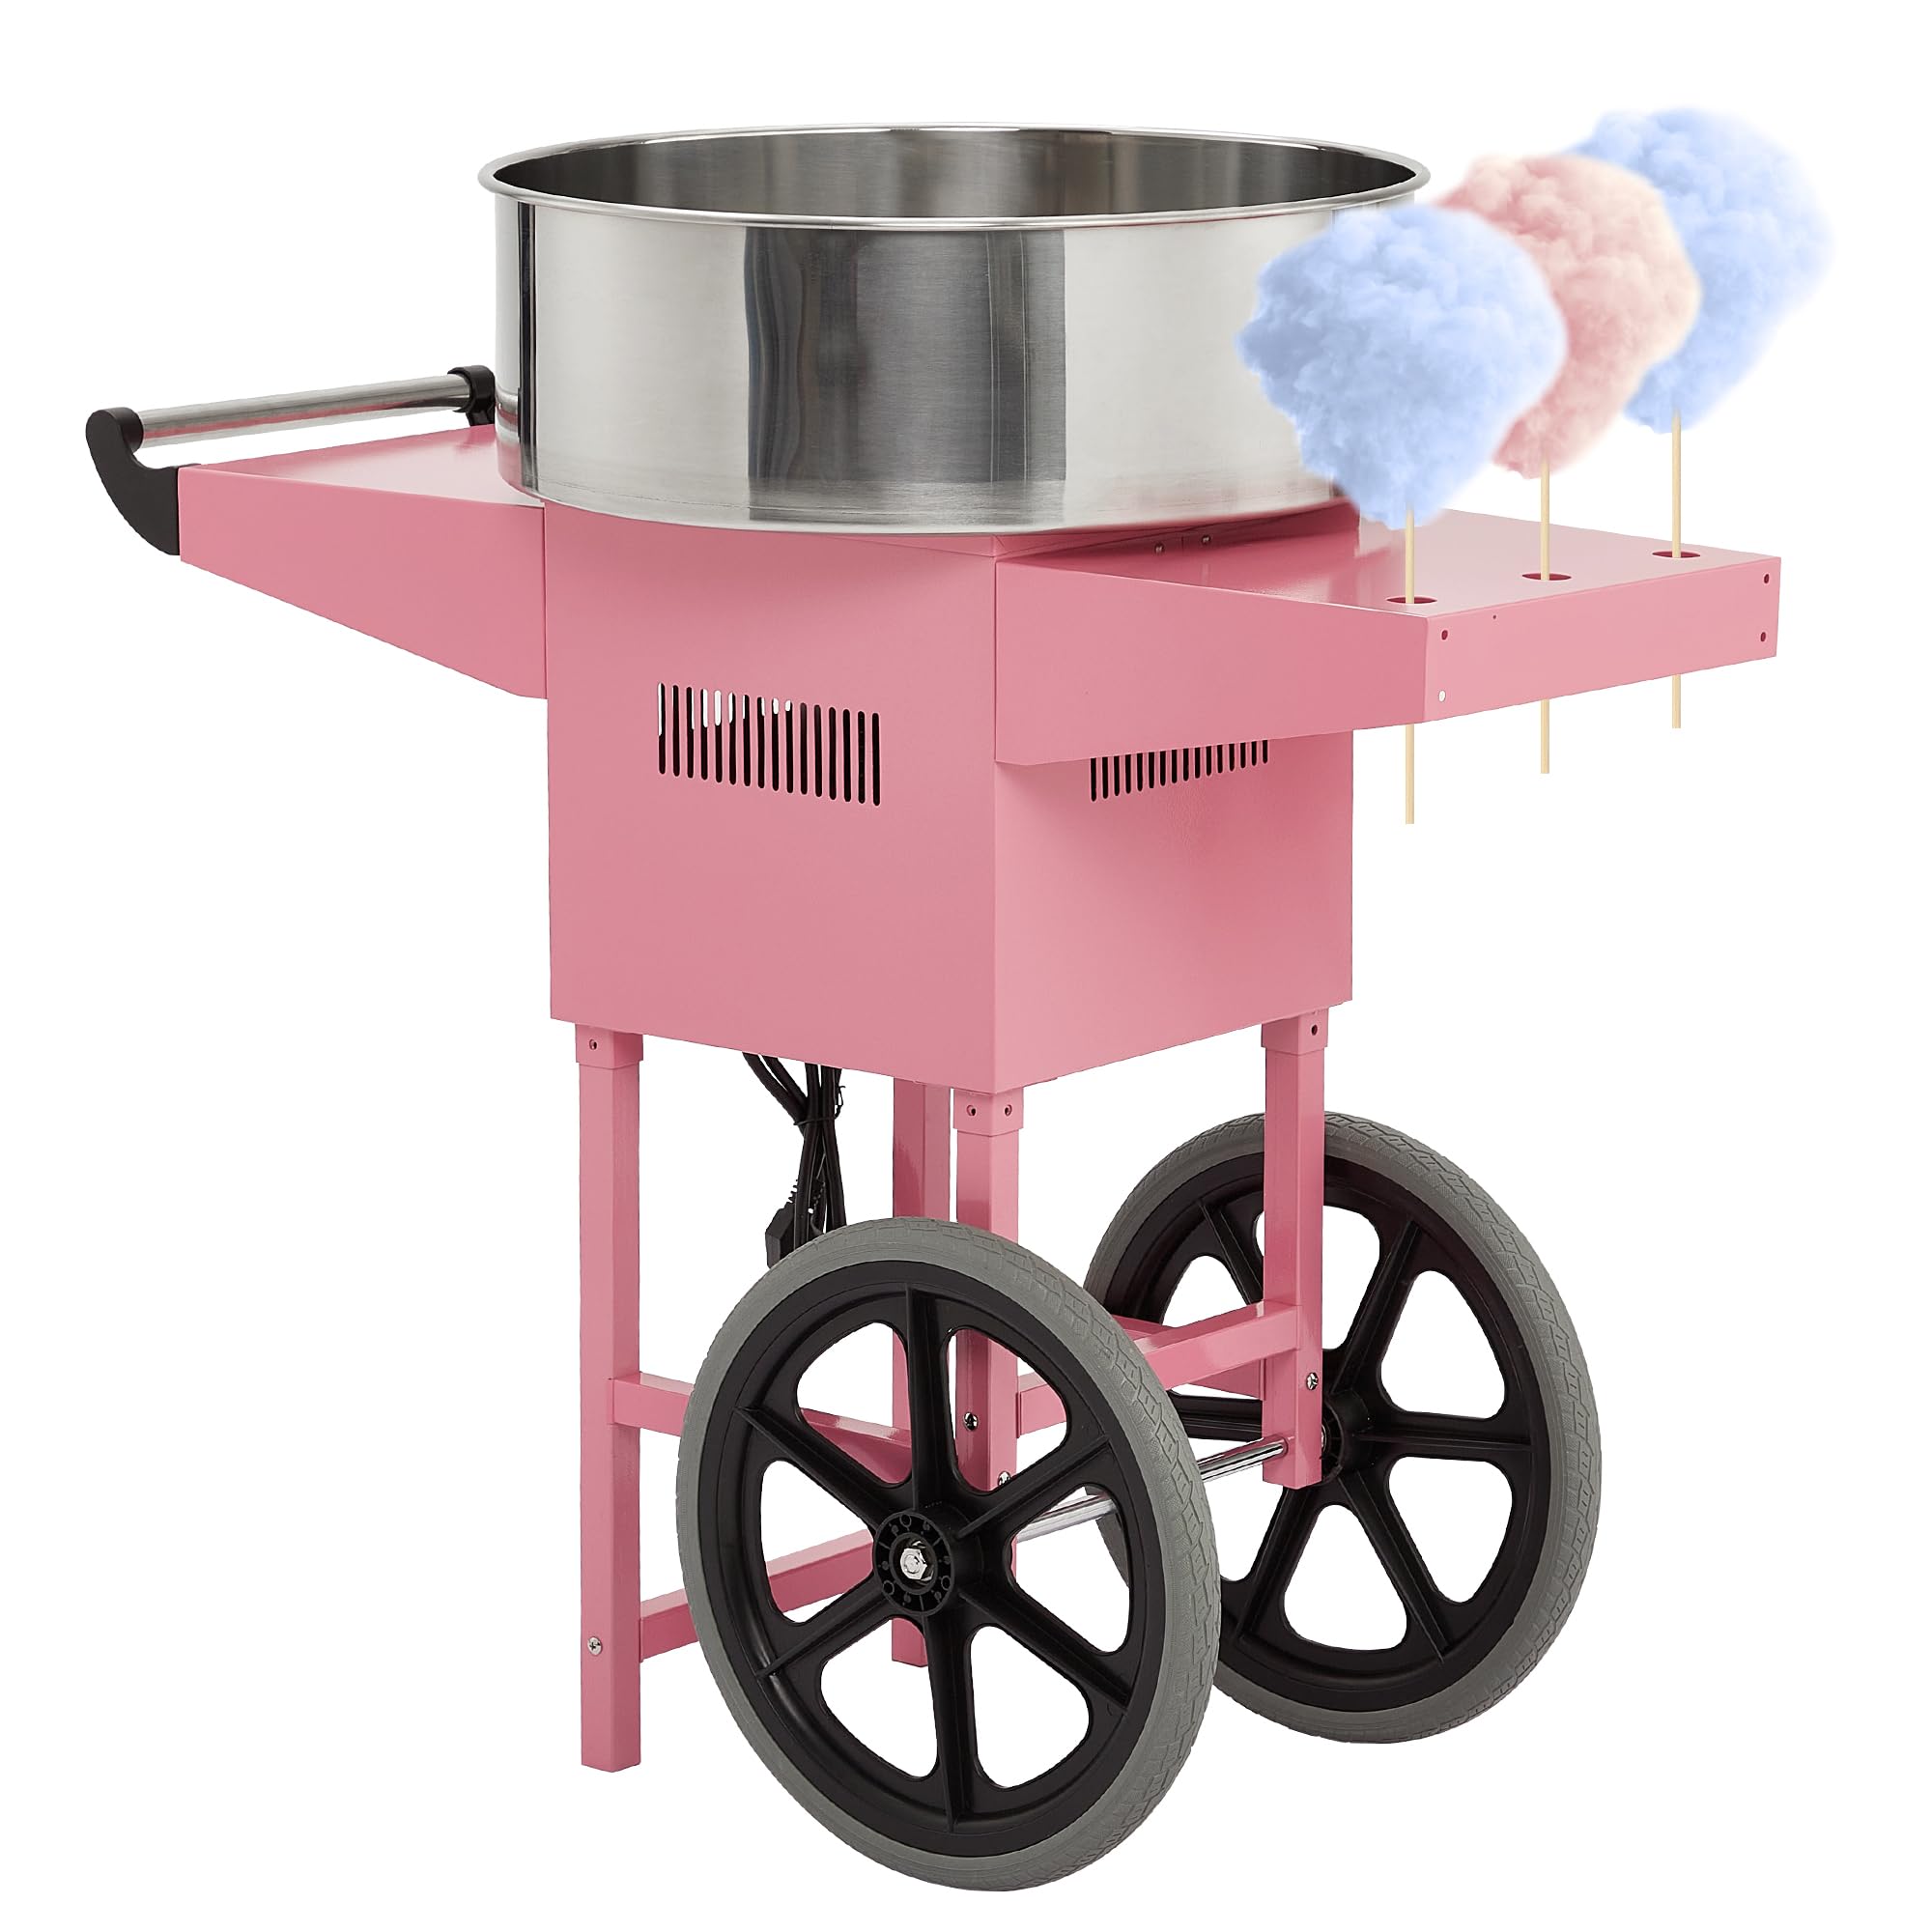 Candery Candy Cotton Machine with Cart for Kids, Electric Commercial Candy Cotton Maker with 20 Inch Stainless Steel Bowl Home Party Festival Pink